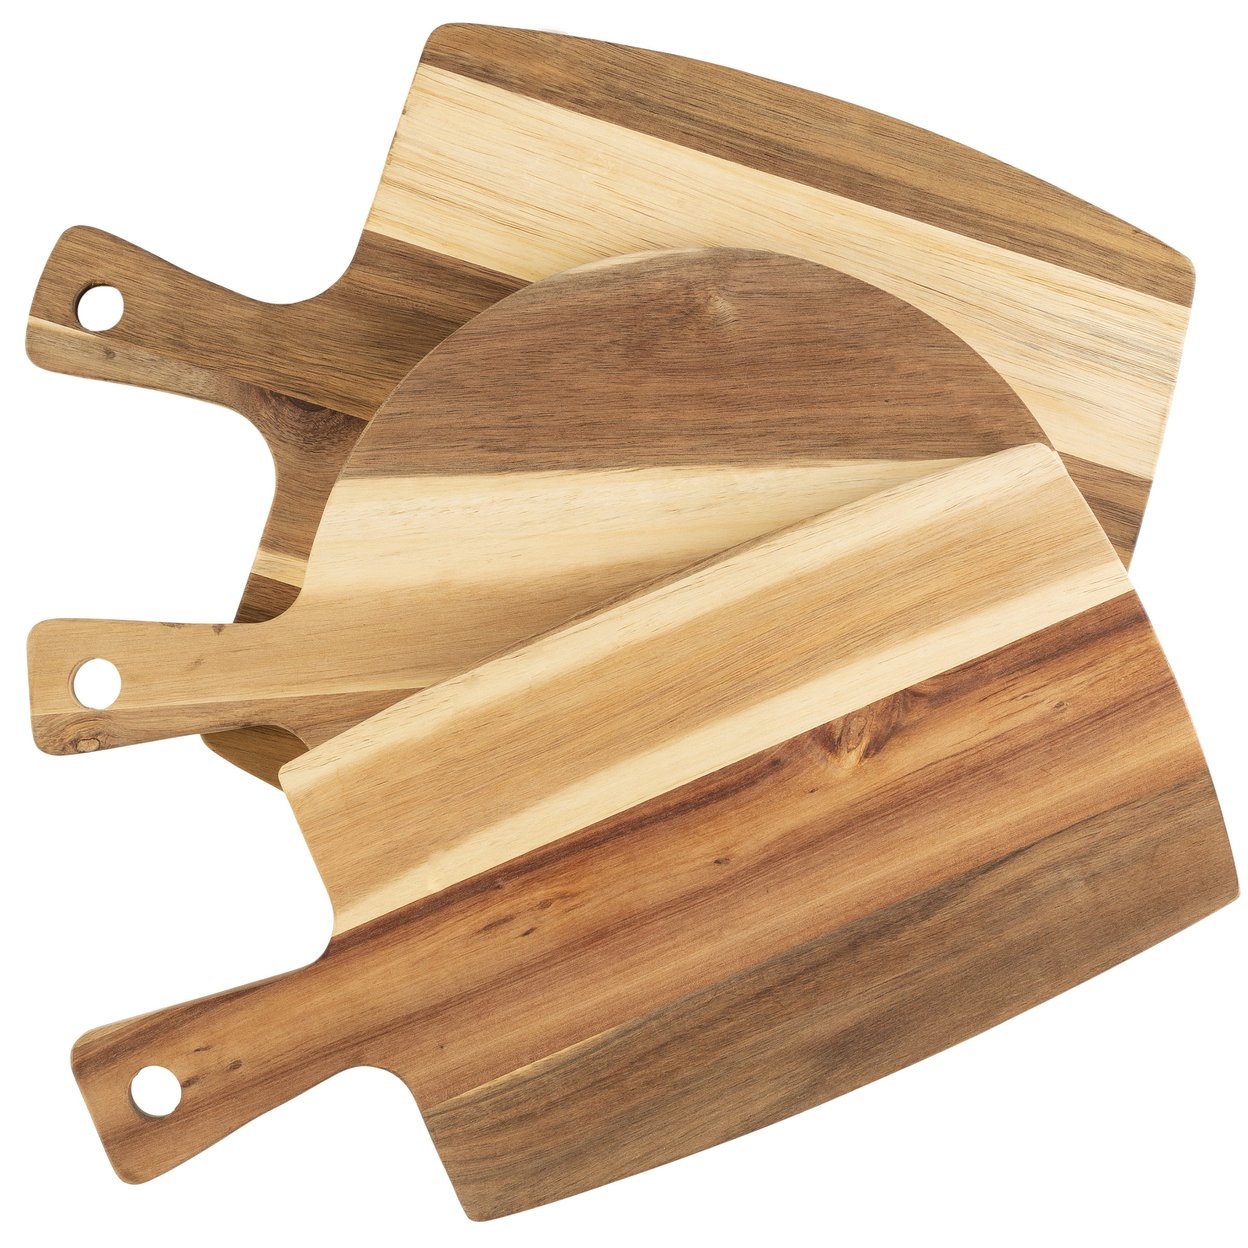 Cutting Boards For Kitchen 3Piece Acacia Wood Cutting Board Set With Handles